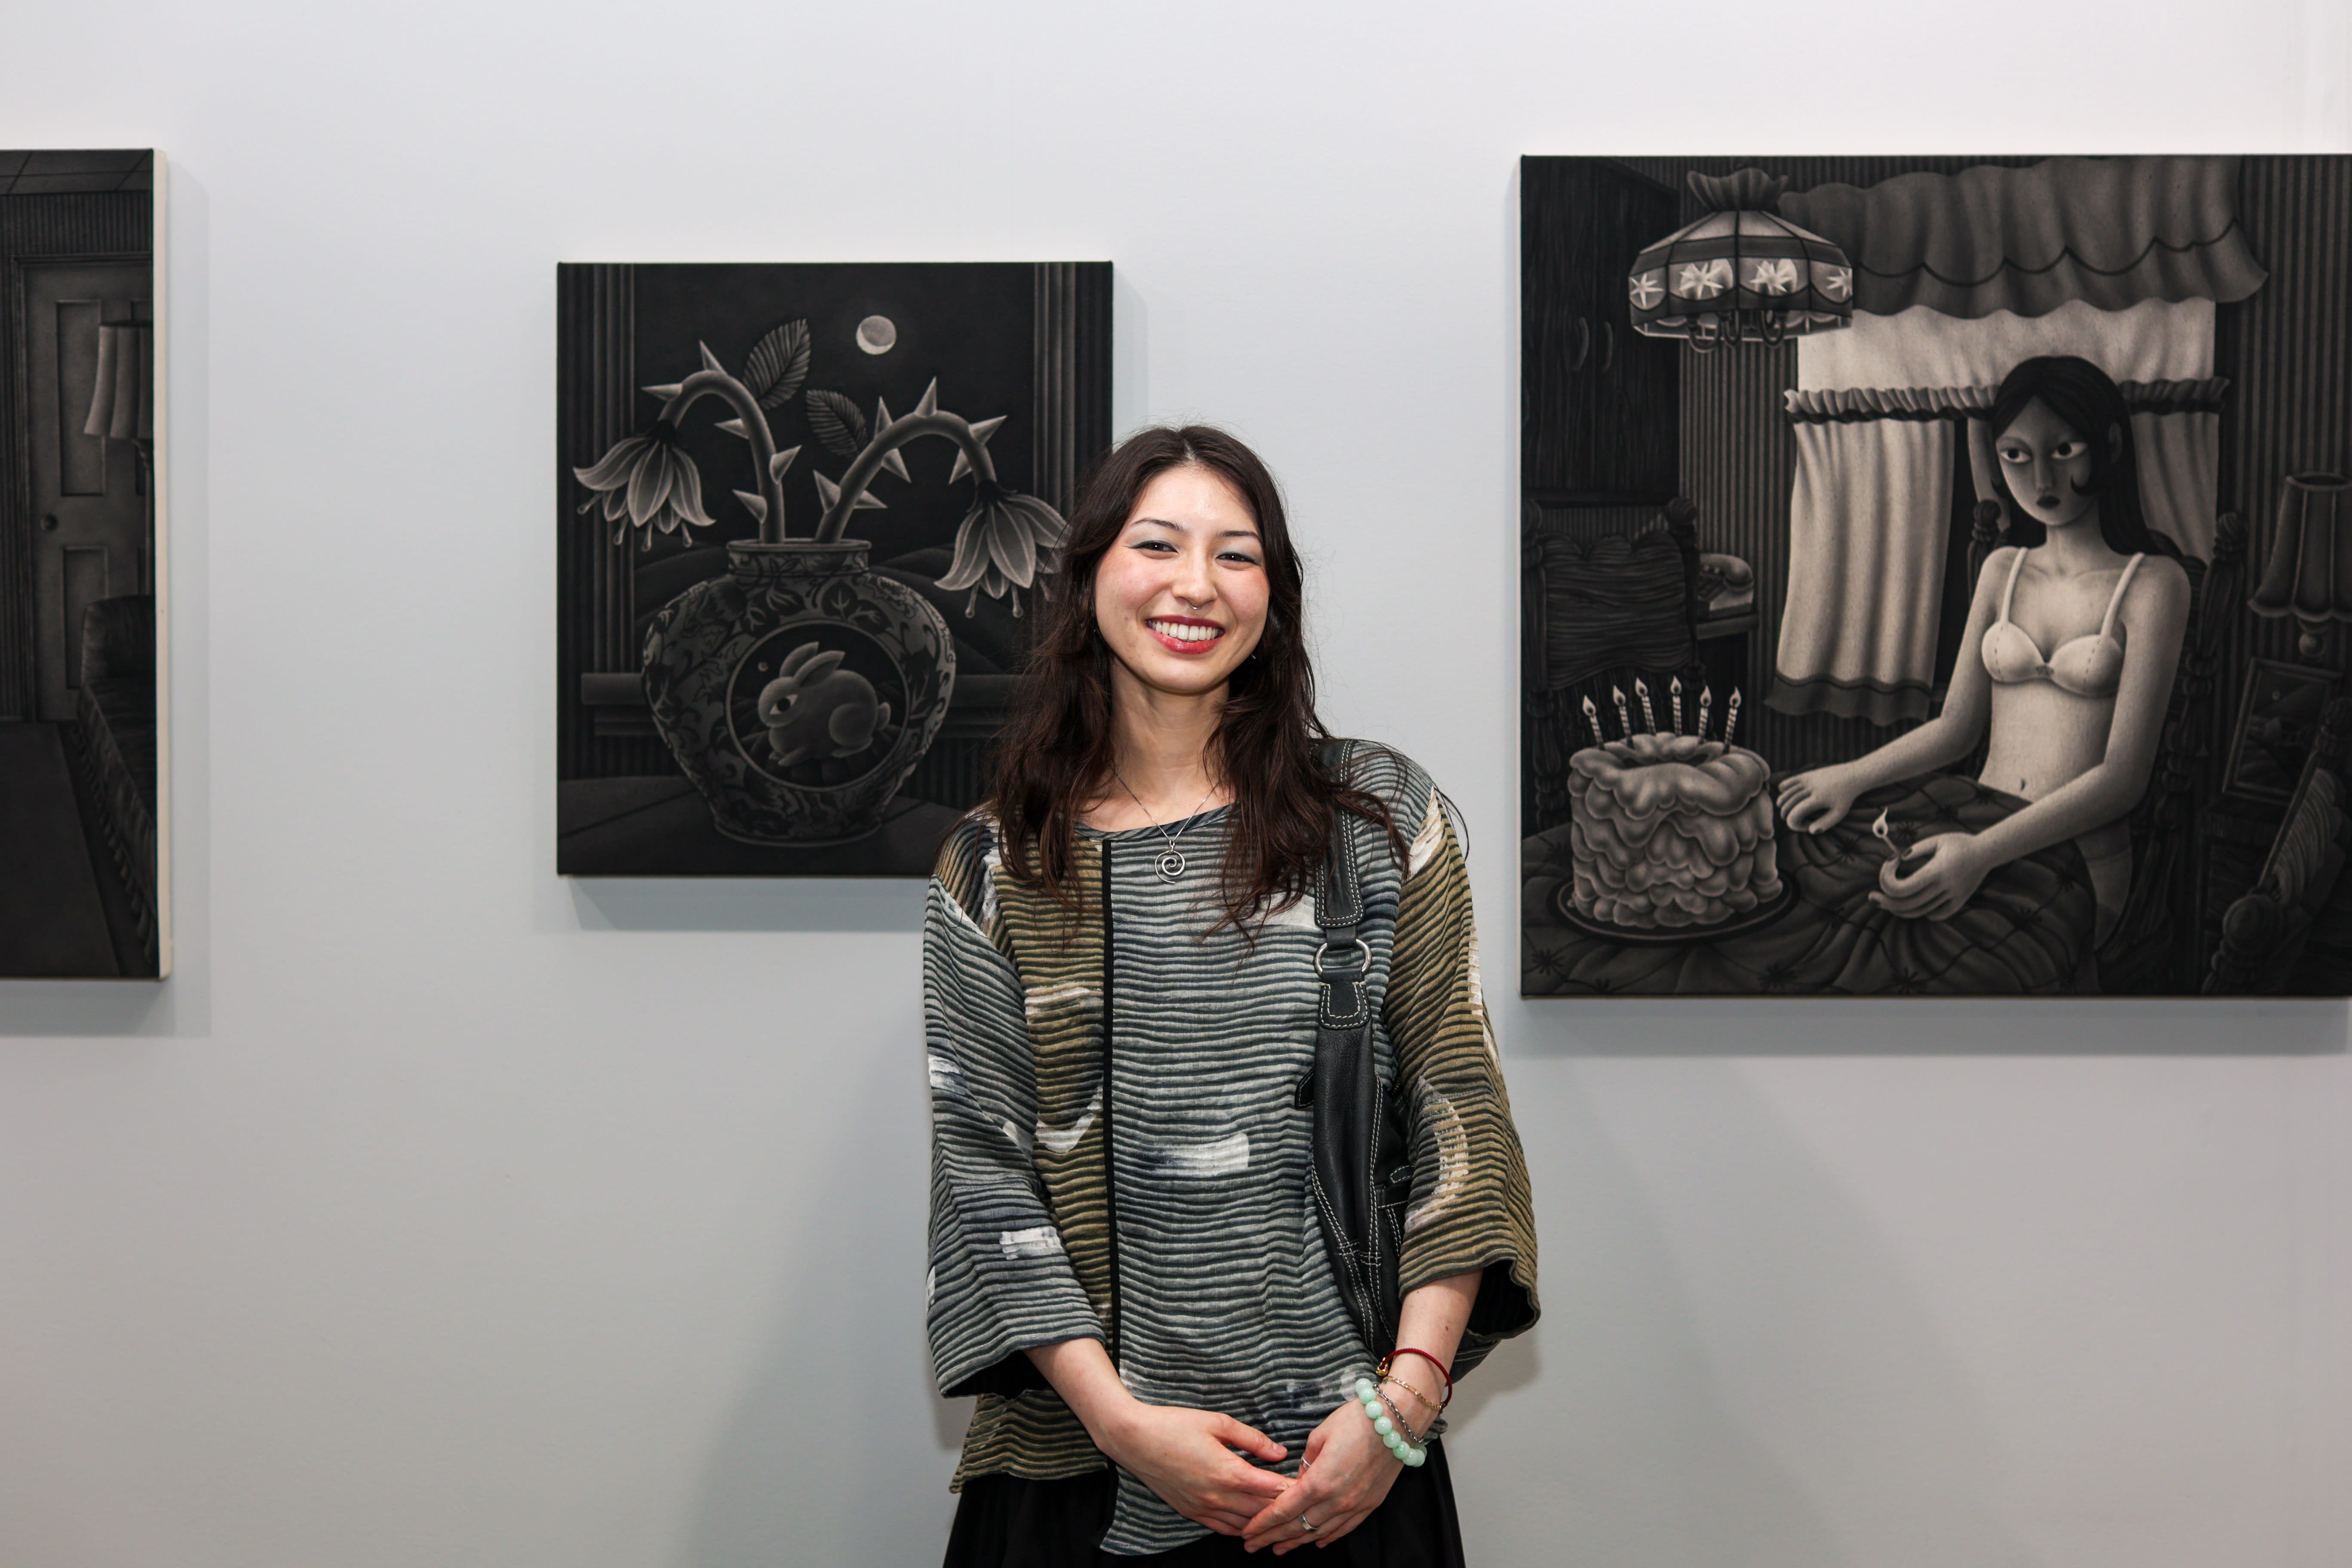 Angela Fang Zirbes with her artoworks at Future Fair